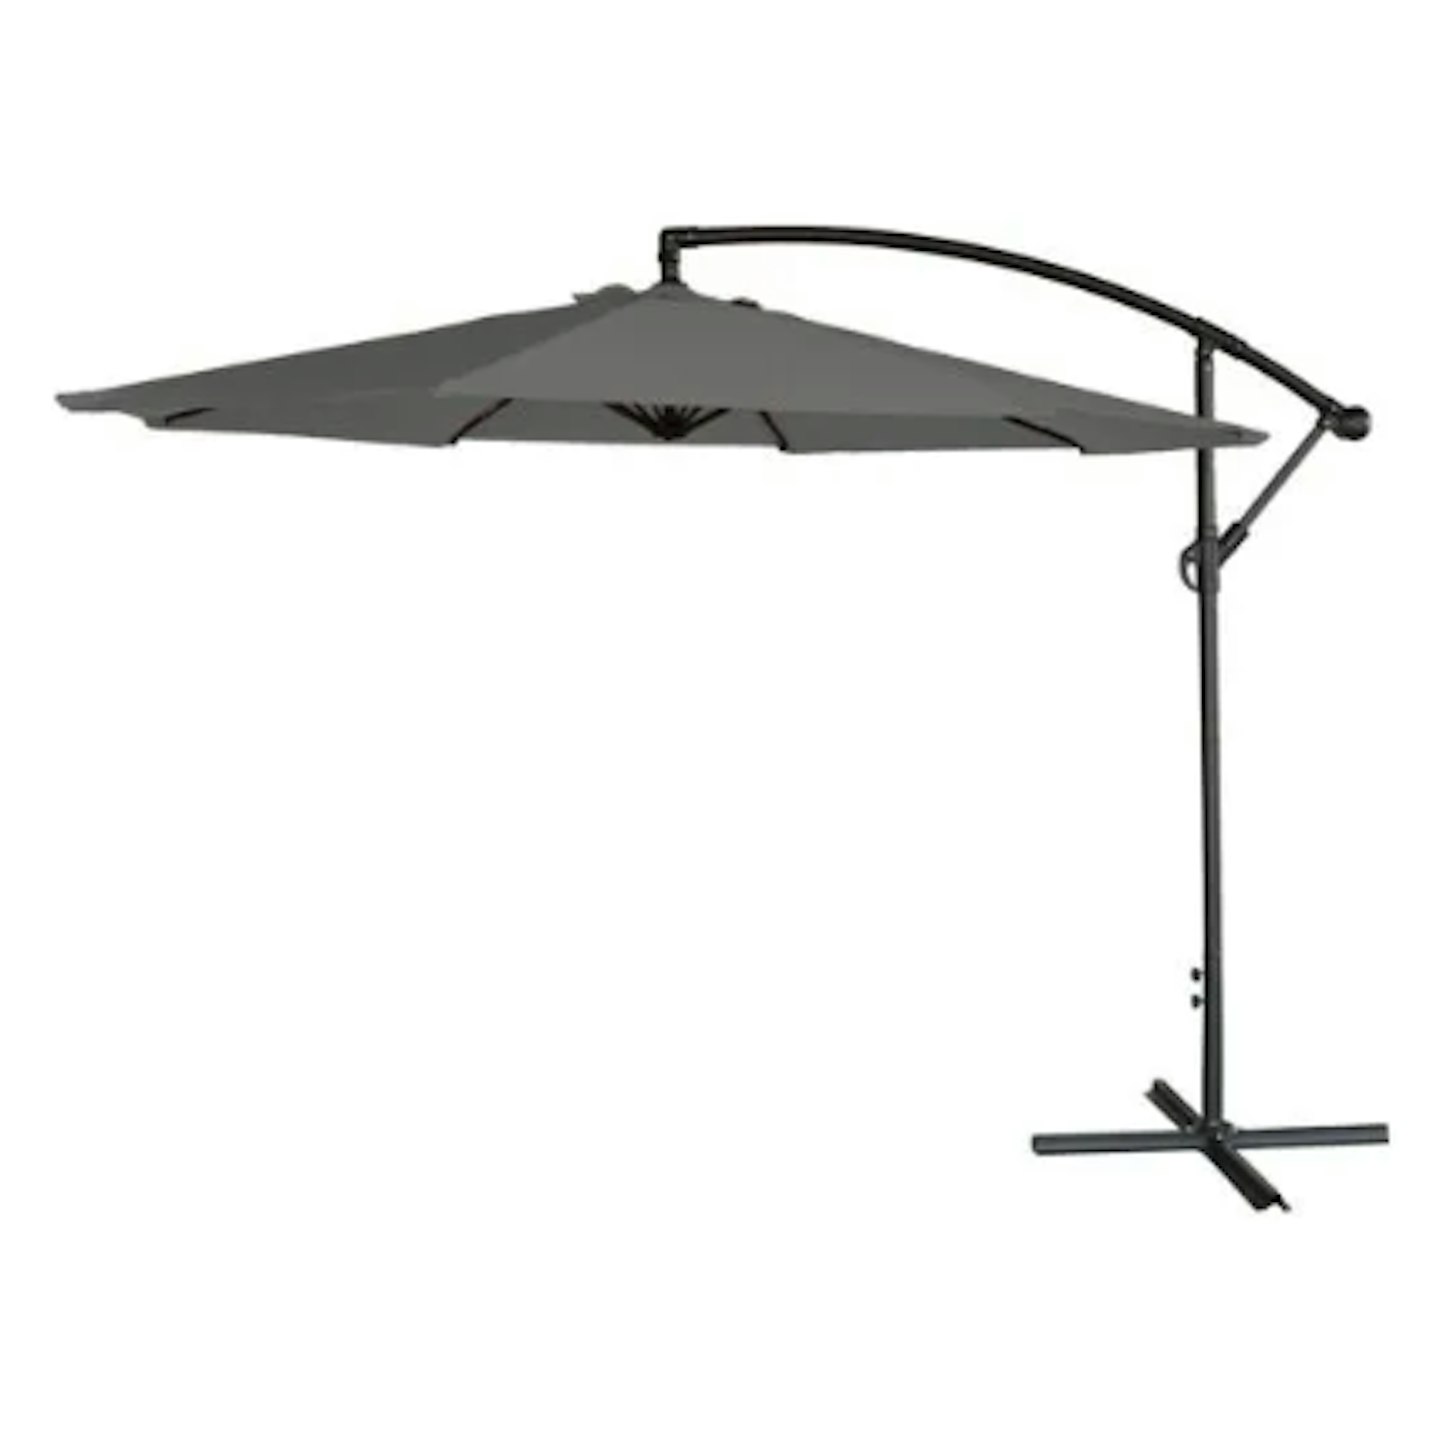 Airwave 3m Banana Hanging Parasol (base not included)